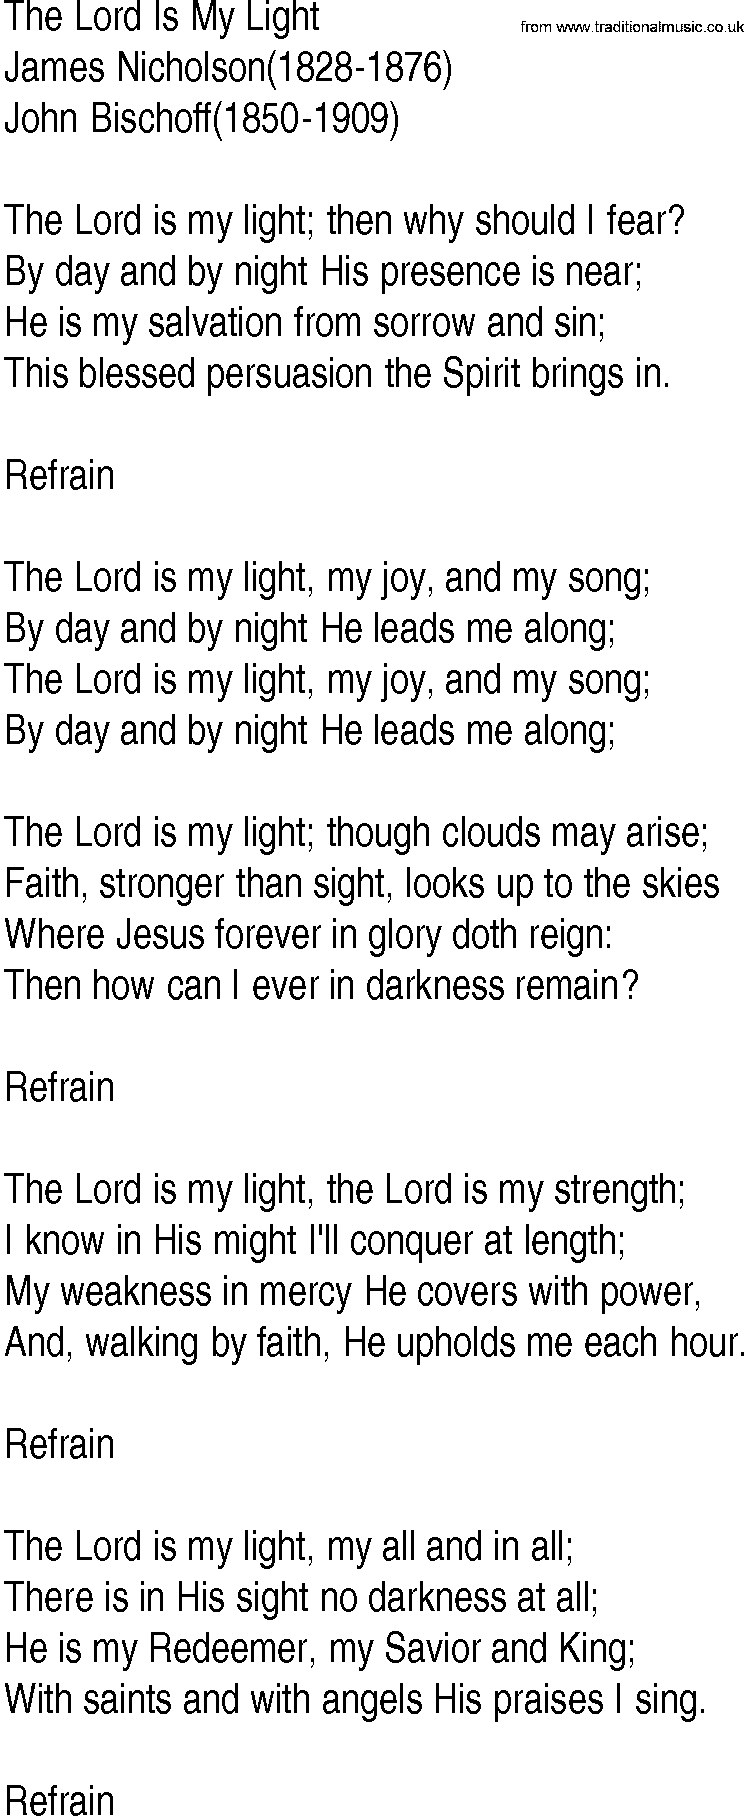 Hymn and Gospel Song: The Lord Is My Light by James Nicholson lyrics